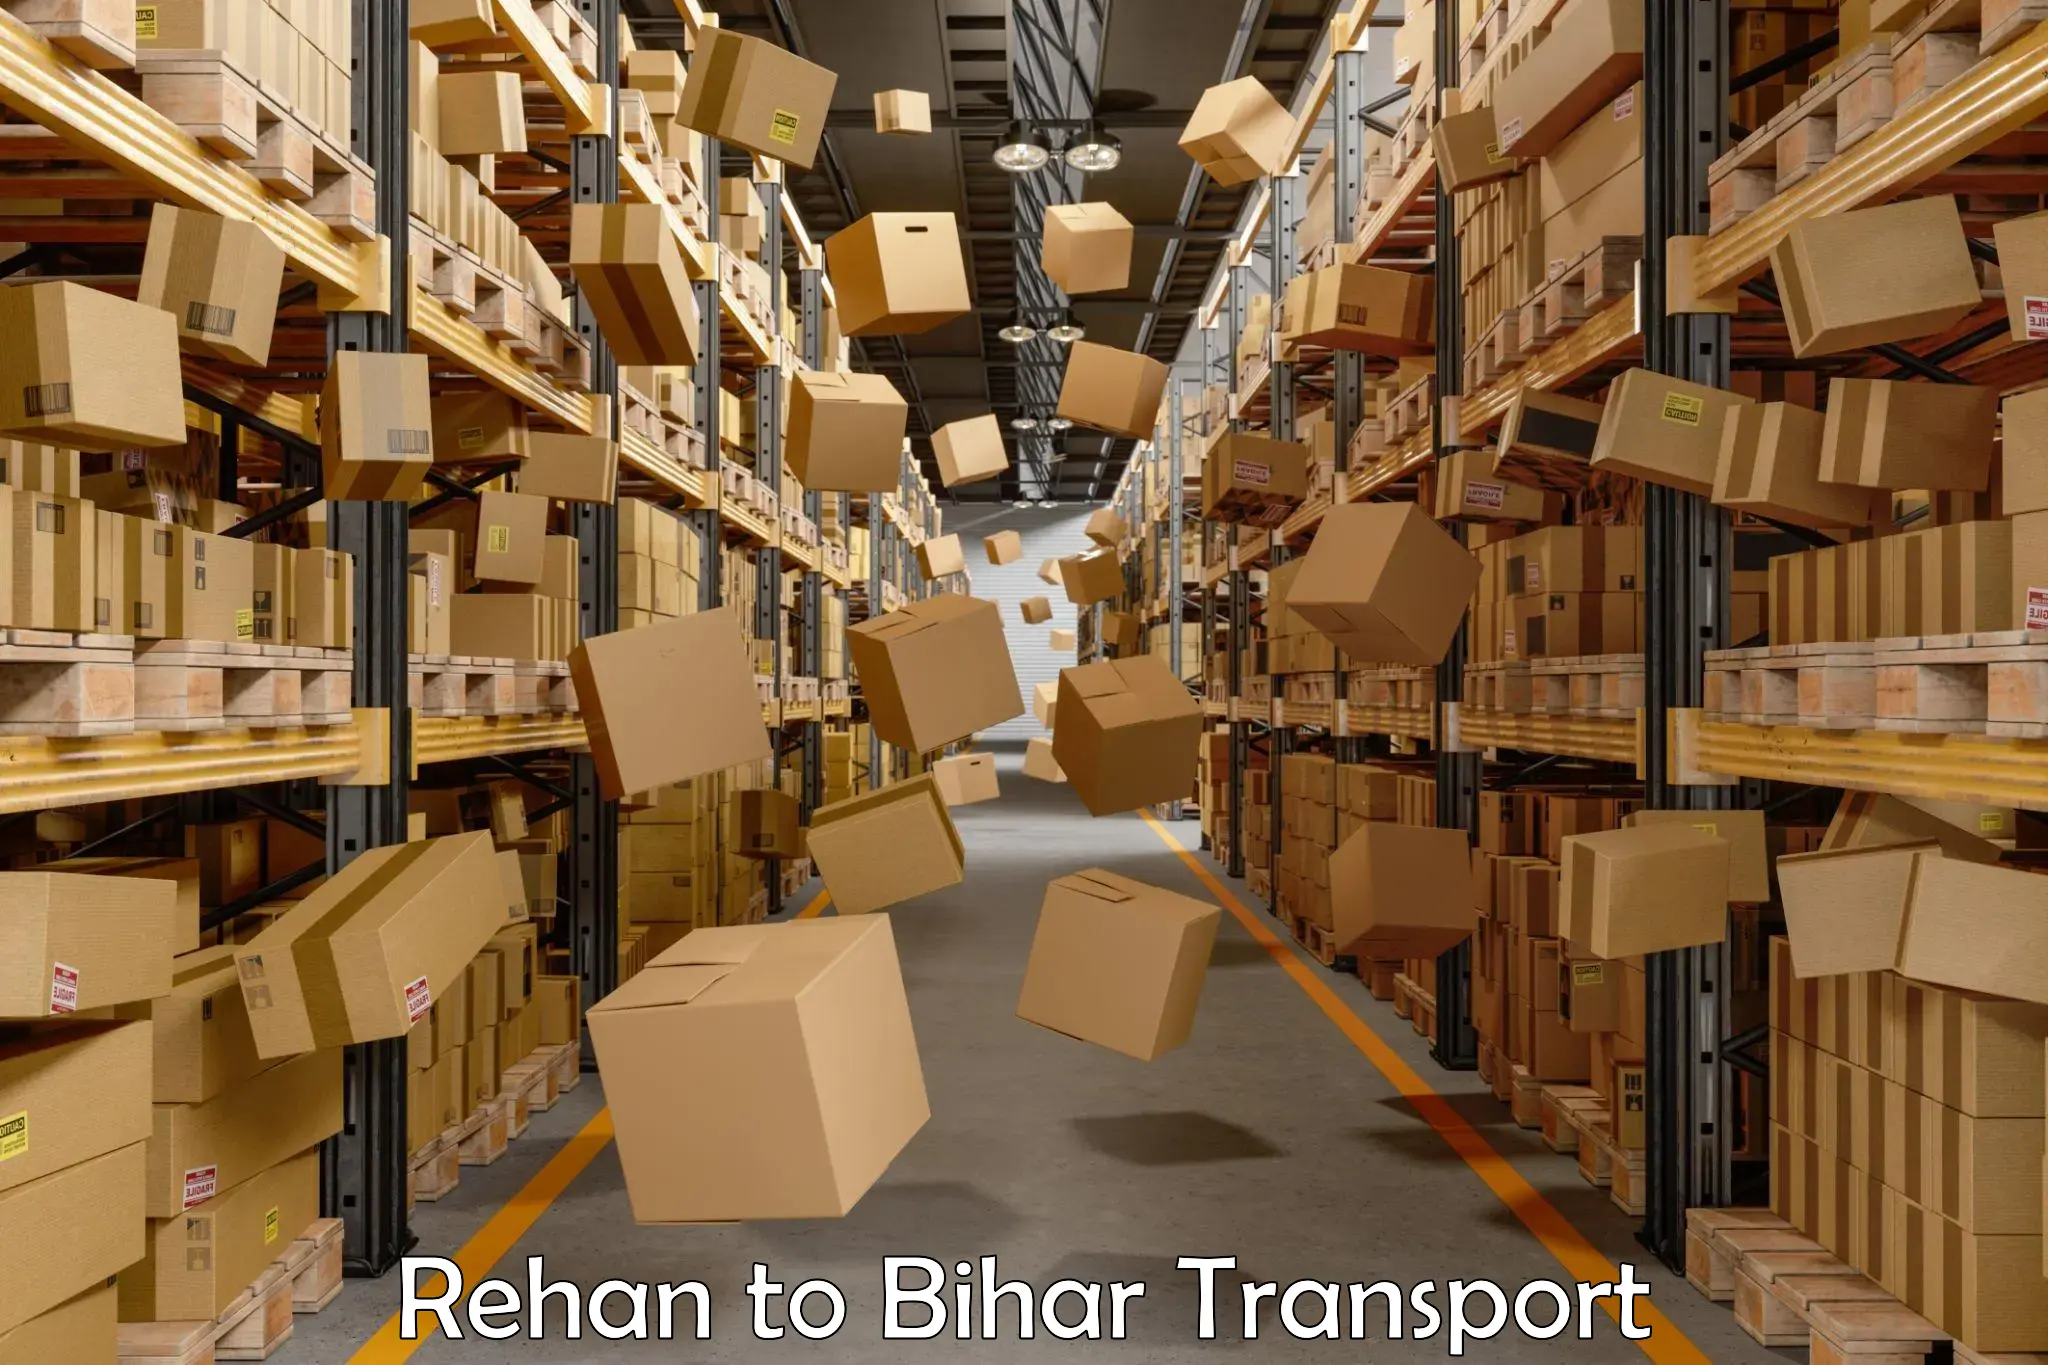 Truck transport companies in India Rehan to Siwan